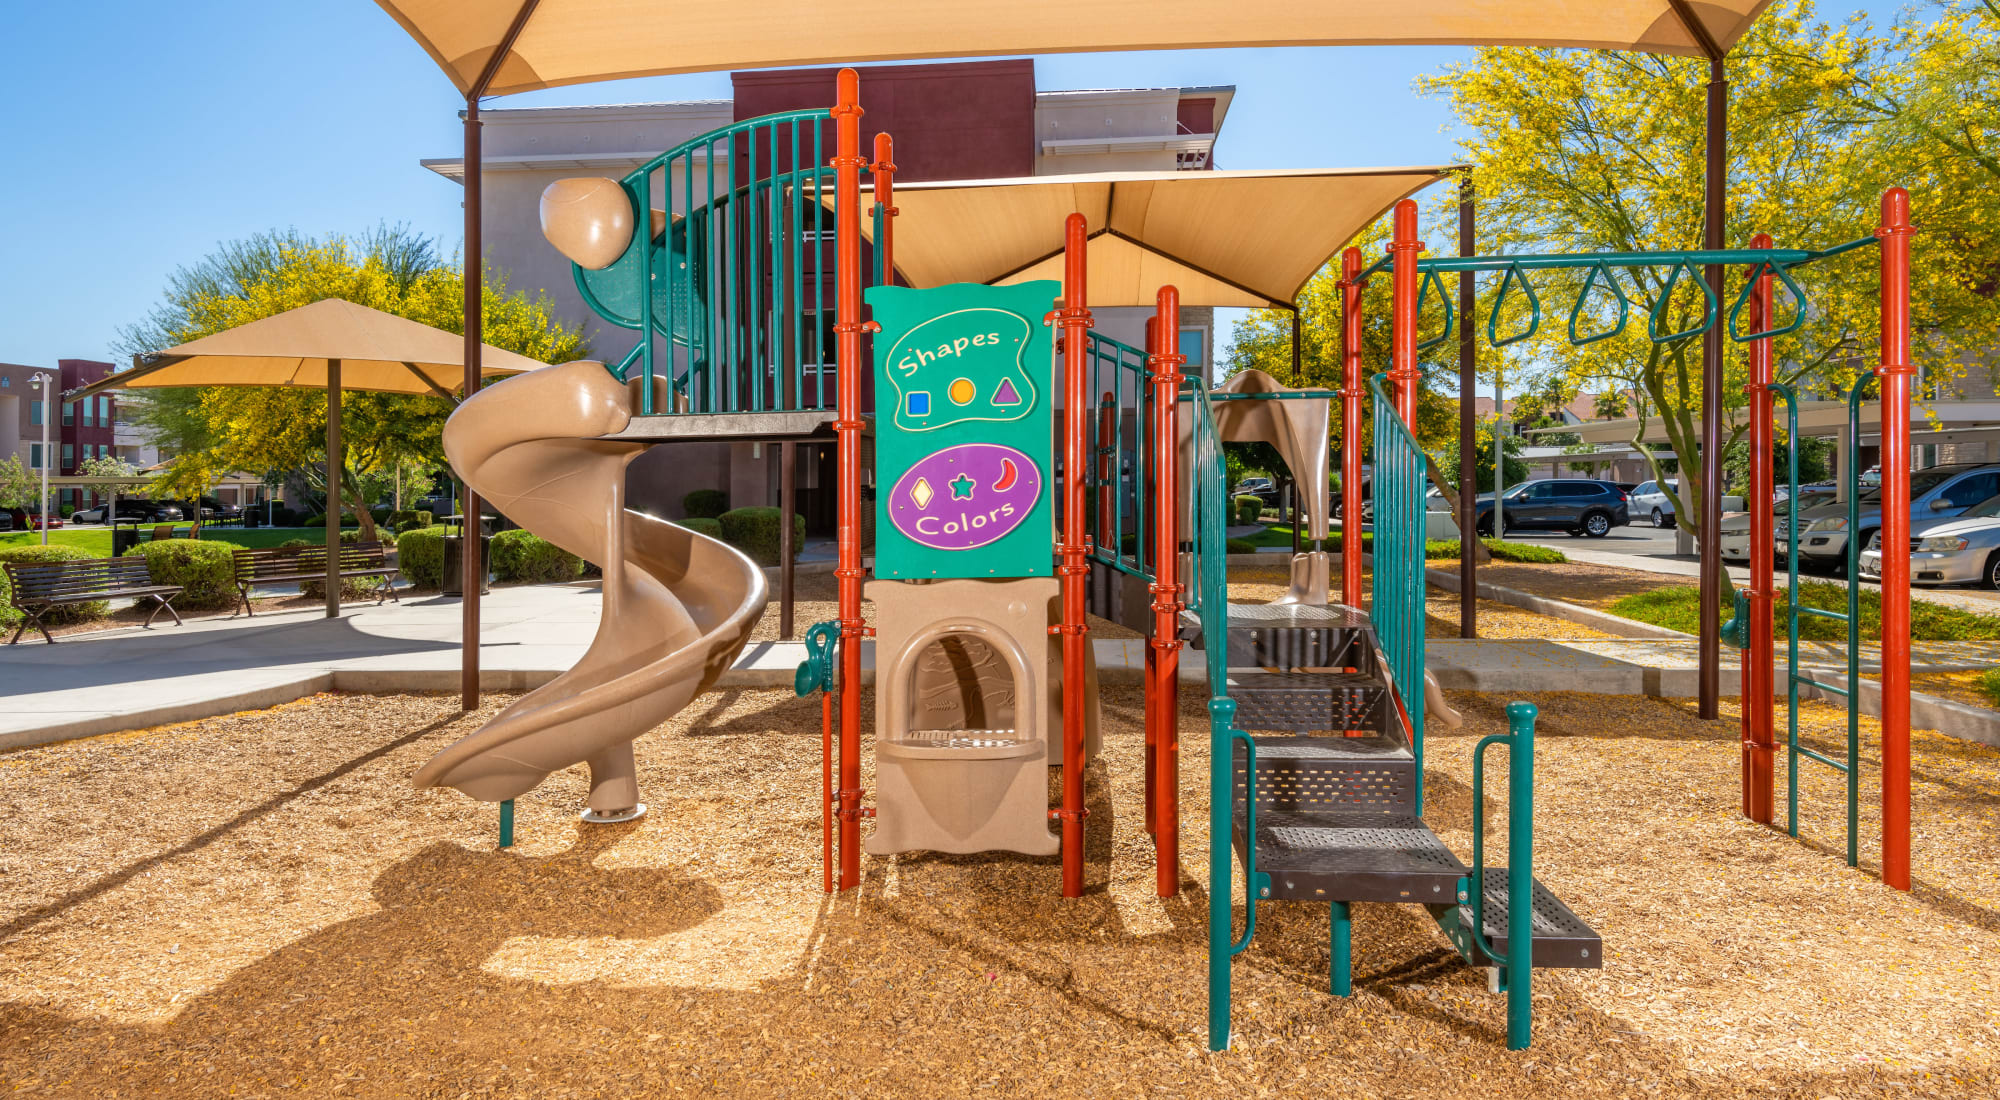 Playground with Shade Sail at Southern Avenue Villas